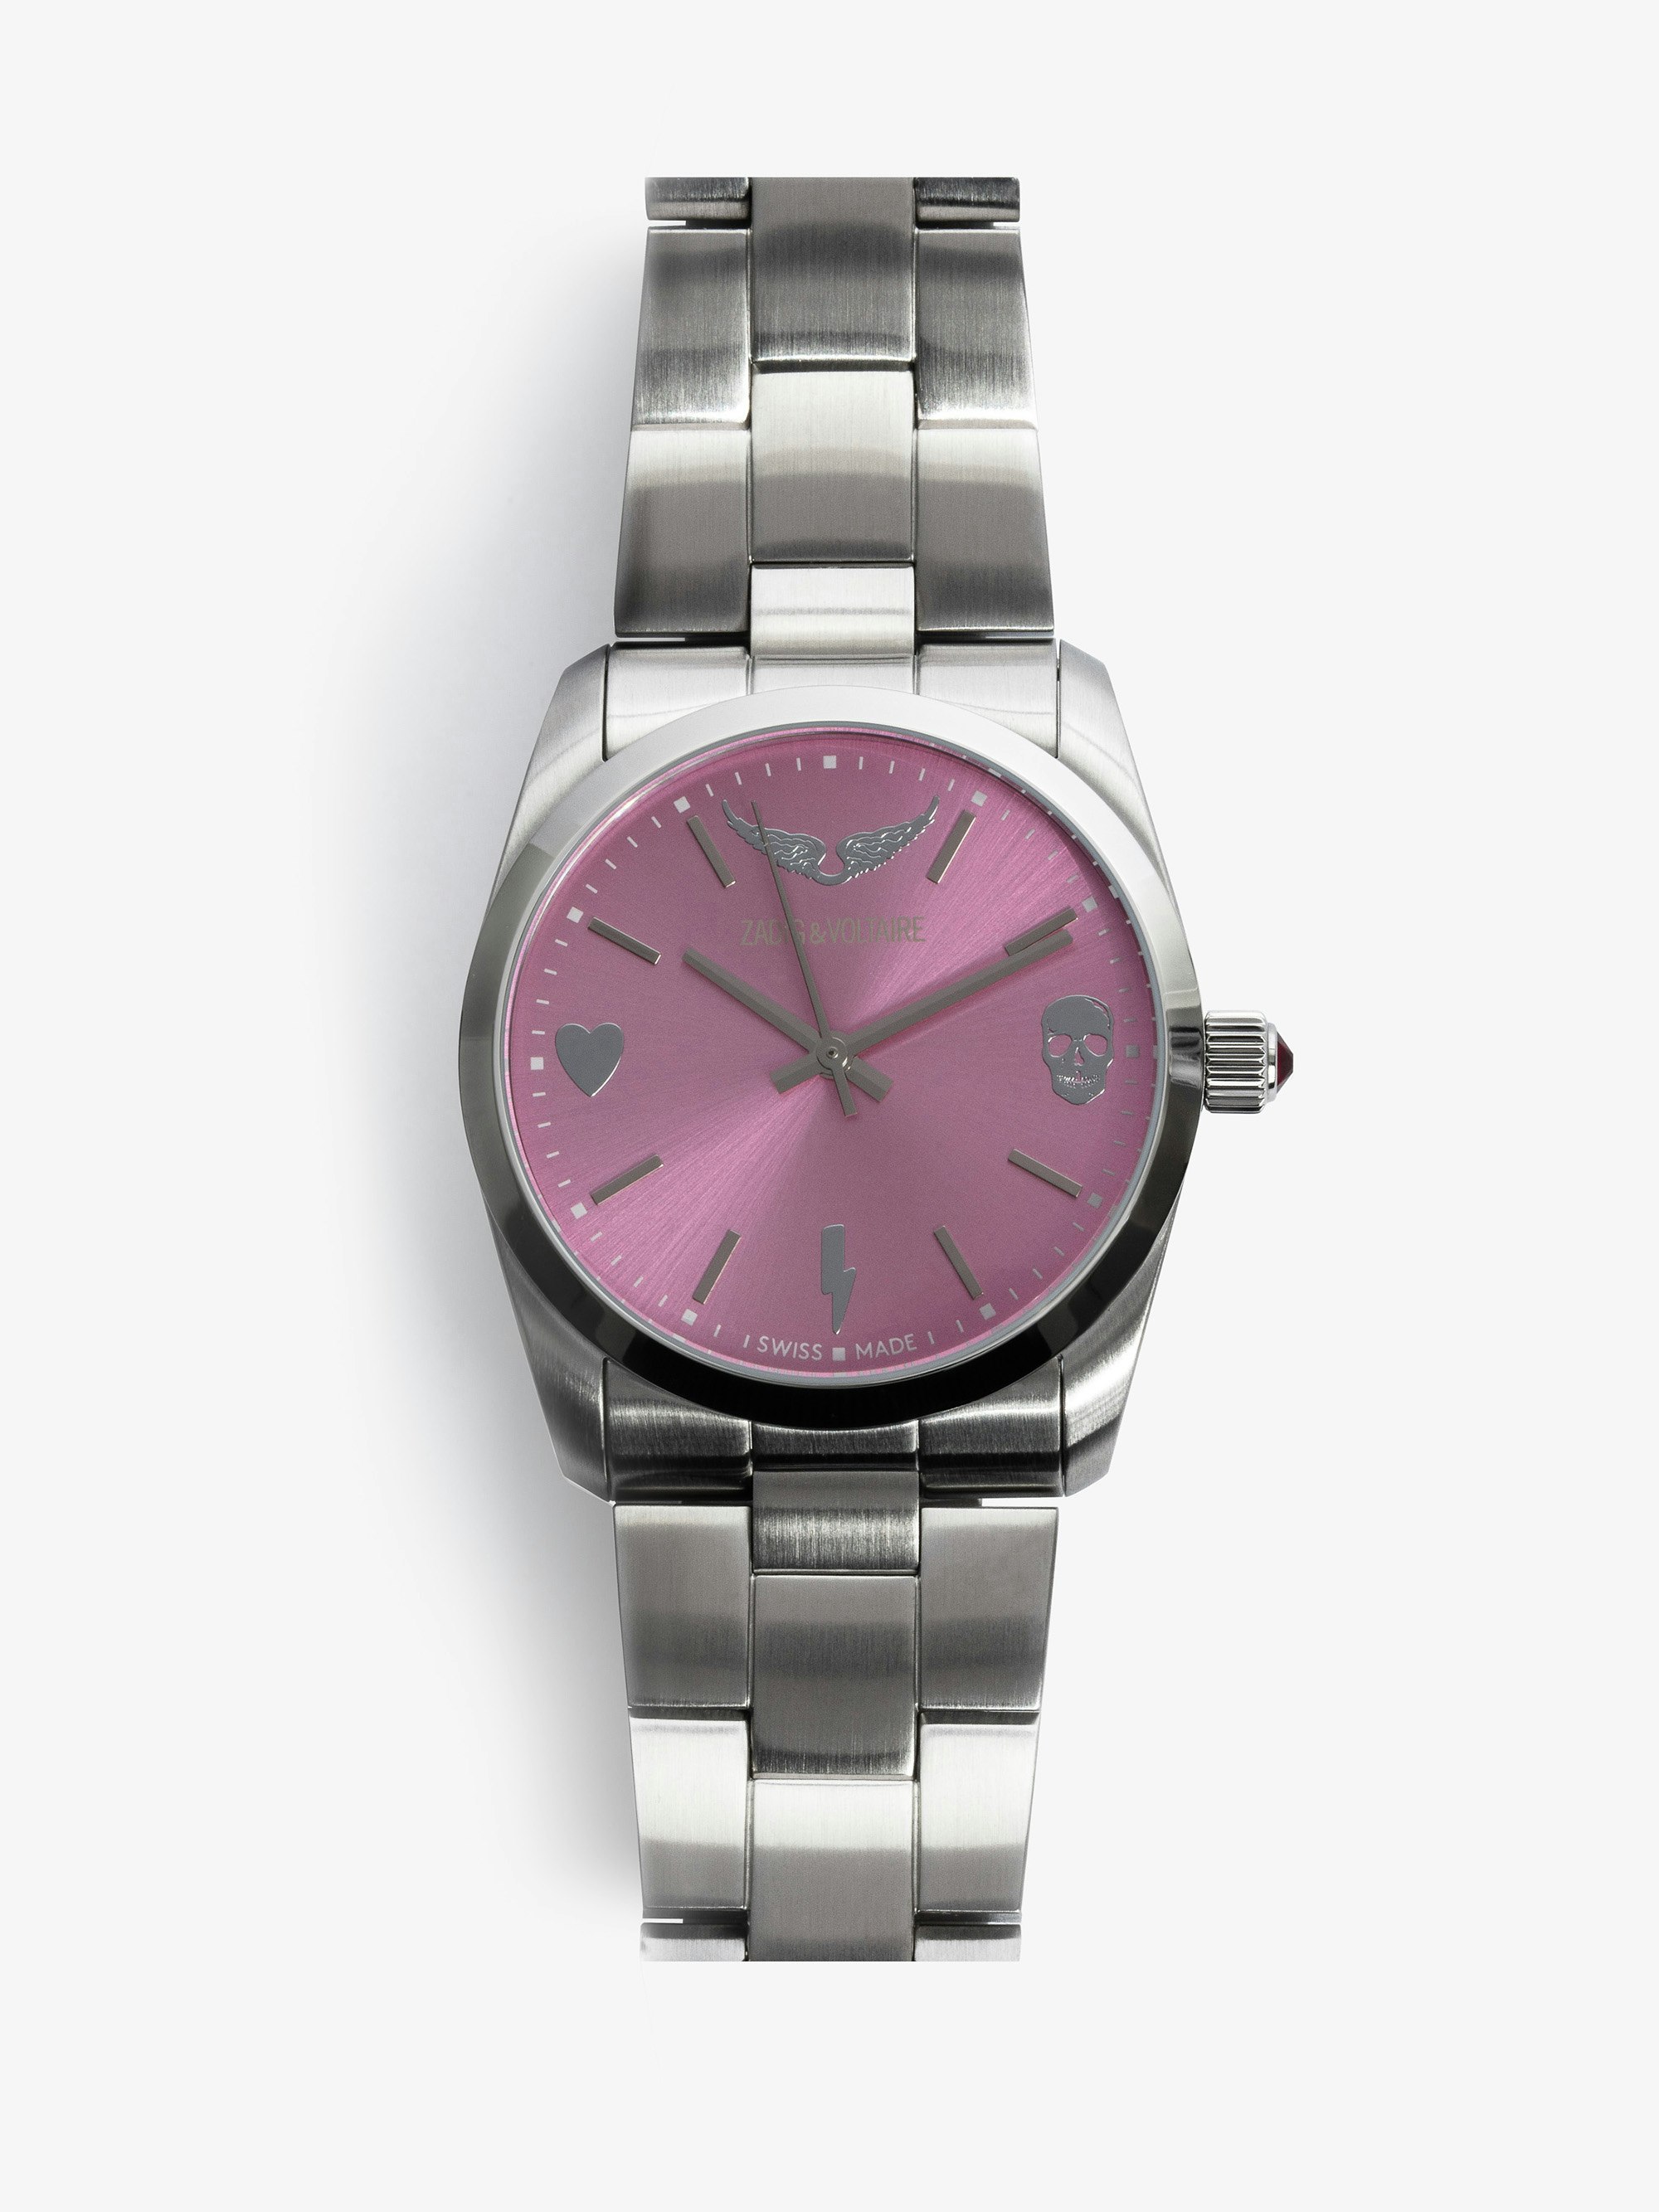 Time2Love Watch - Women's stainless steel watch with pink face